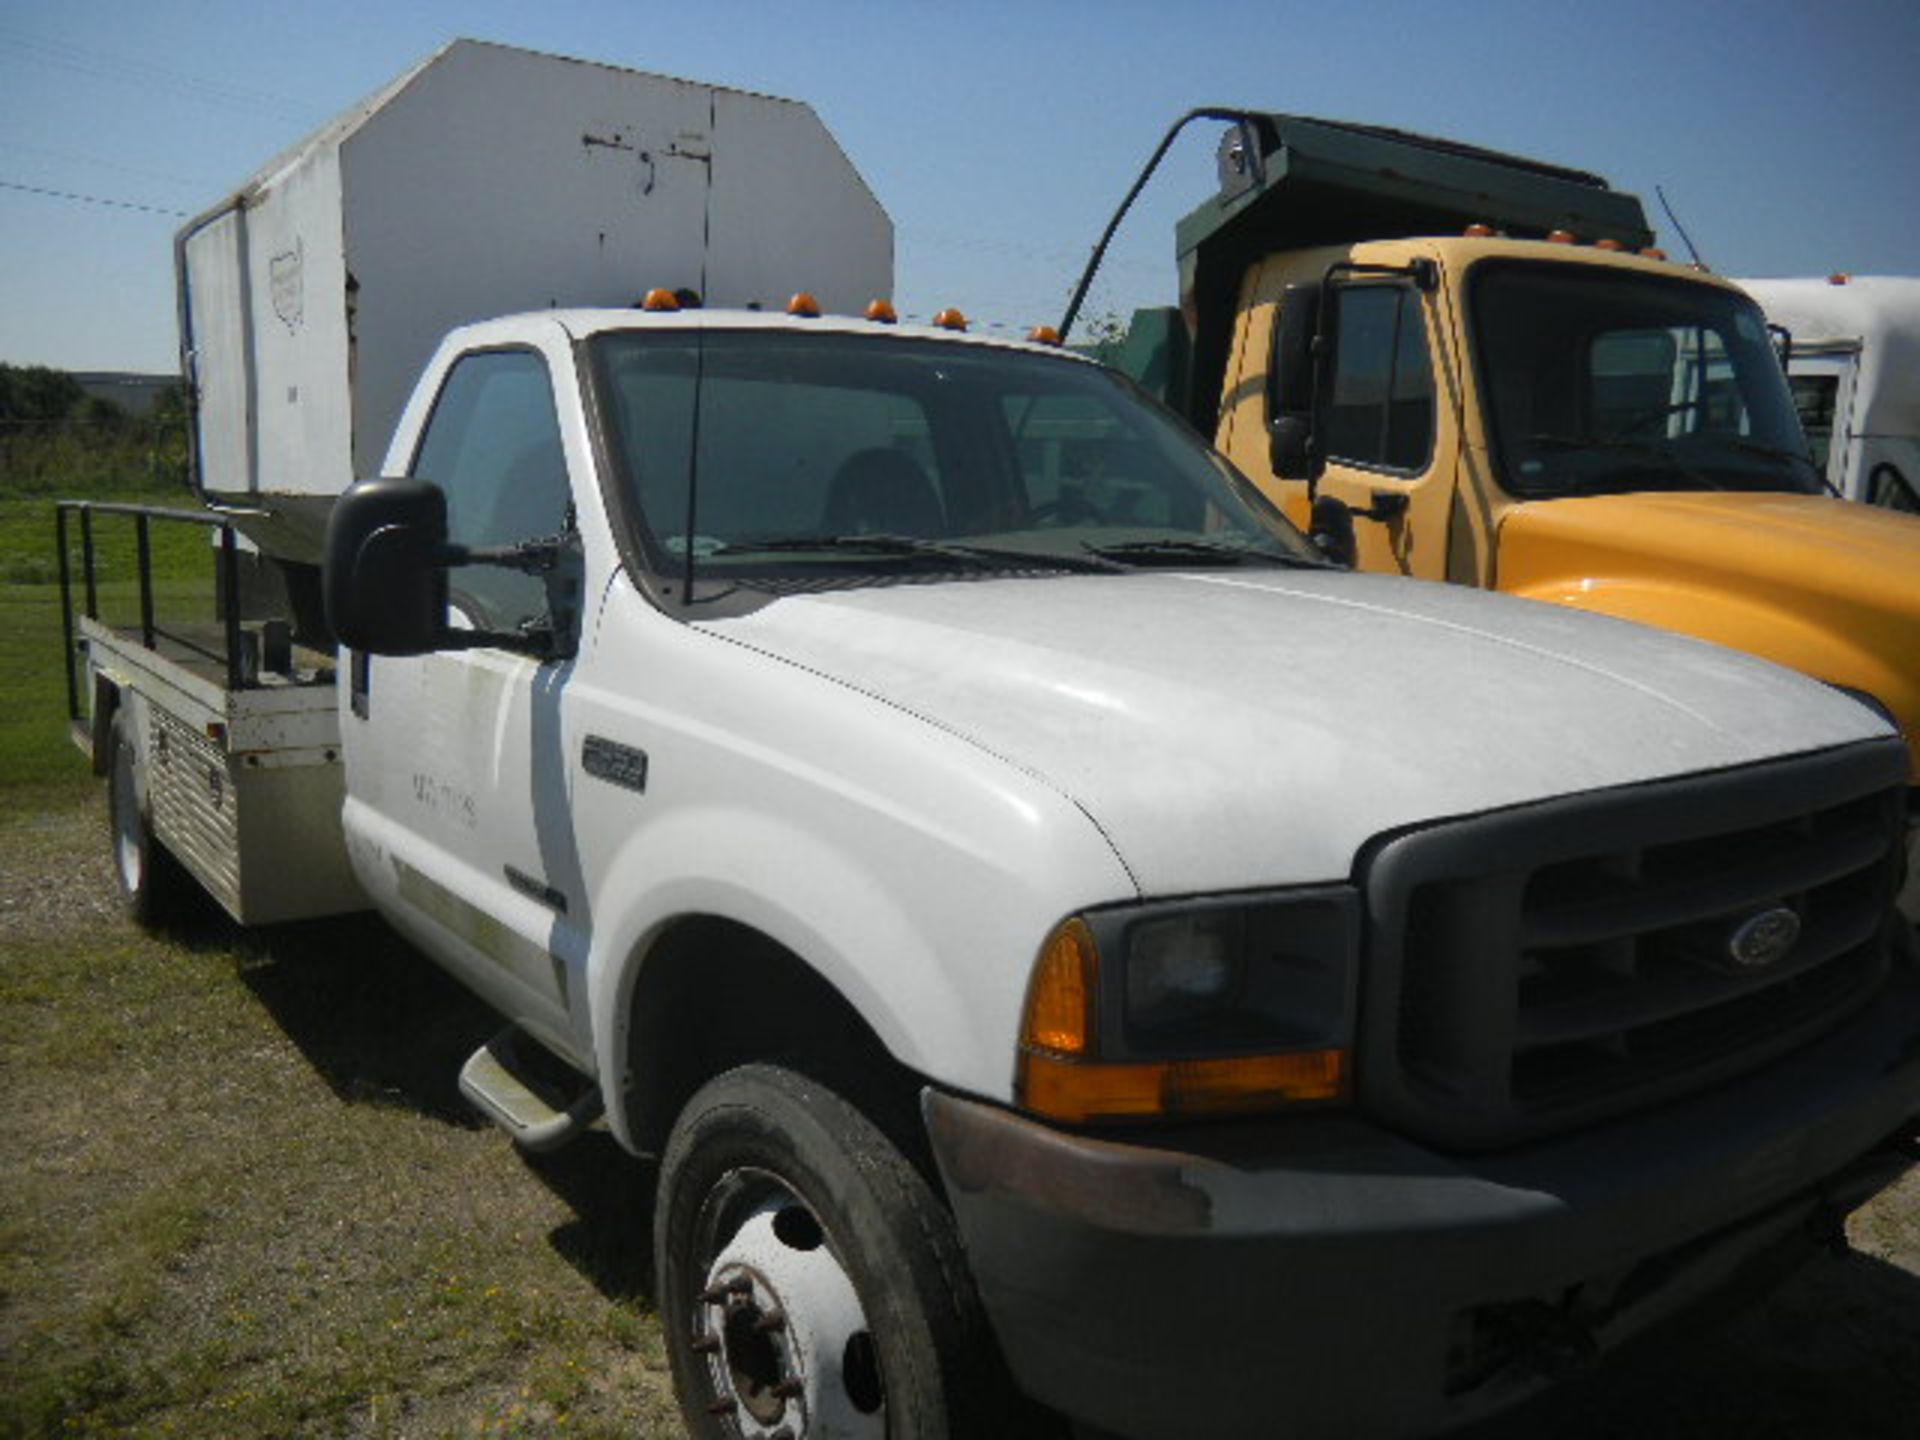 2001 Ford F450 Rod Truck - Asset I.D. #560 - Last of Vin (A44031)